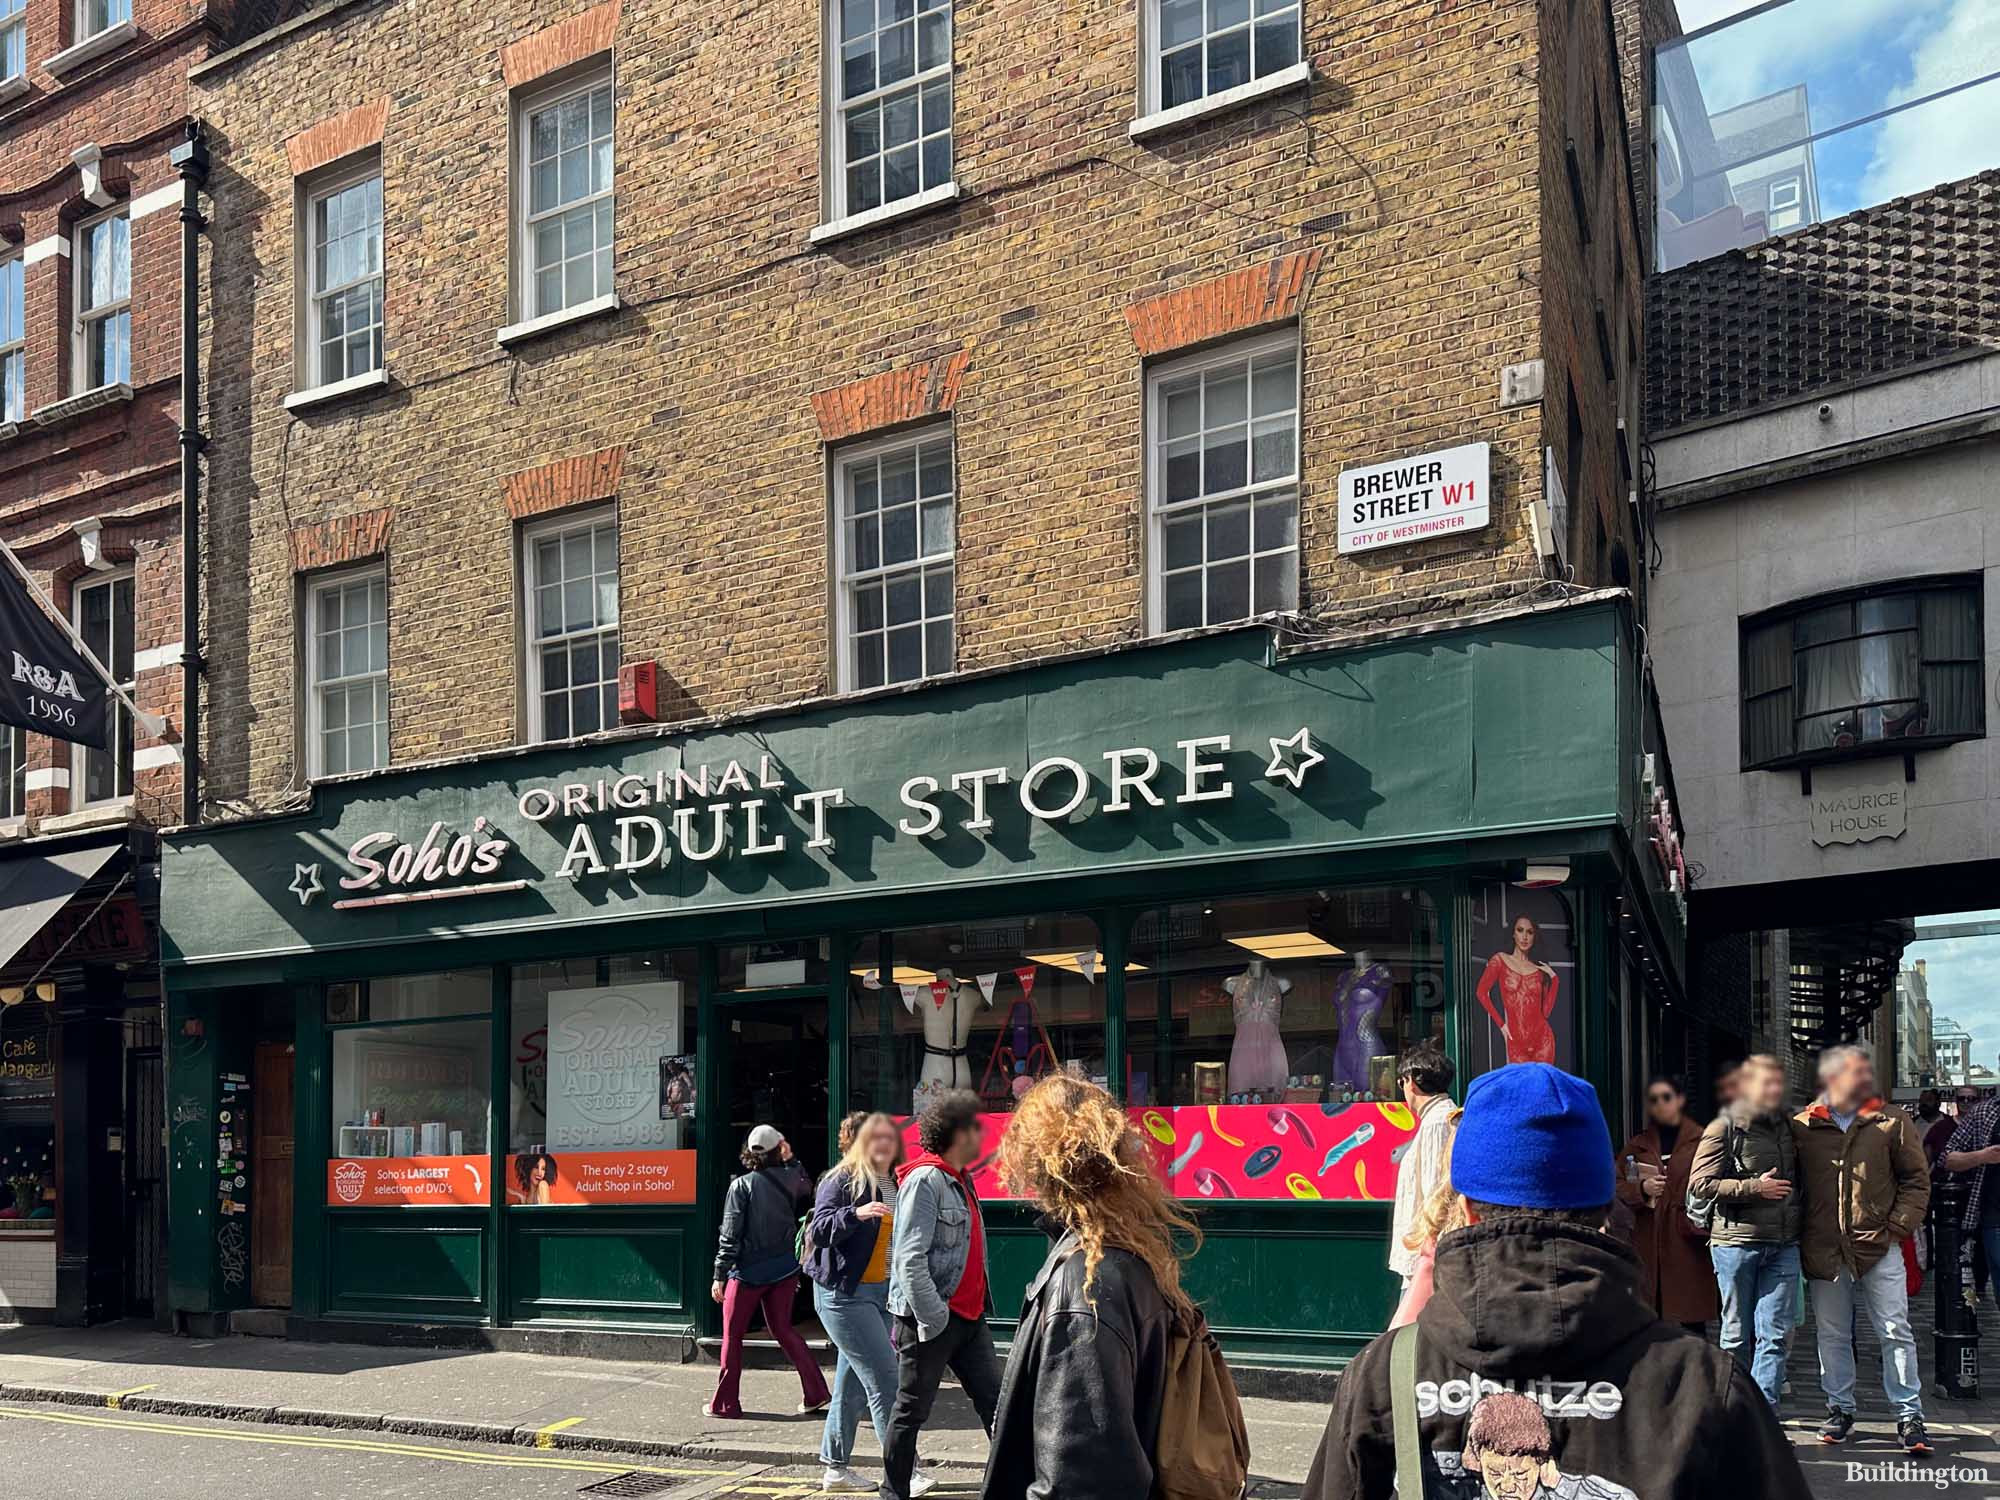 Soho's Original Adult Store building at 12 Brewer Street in Soho, London W1.